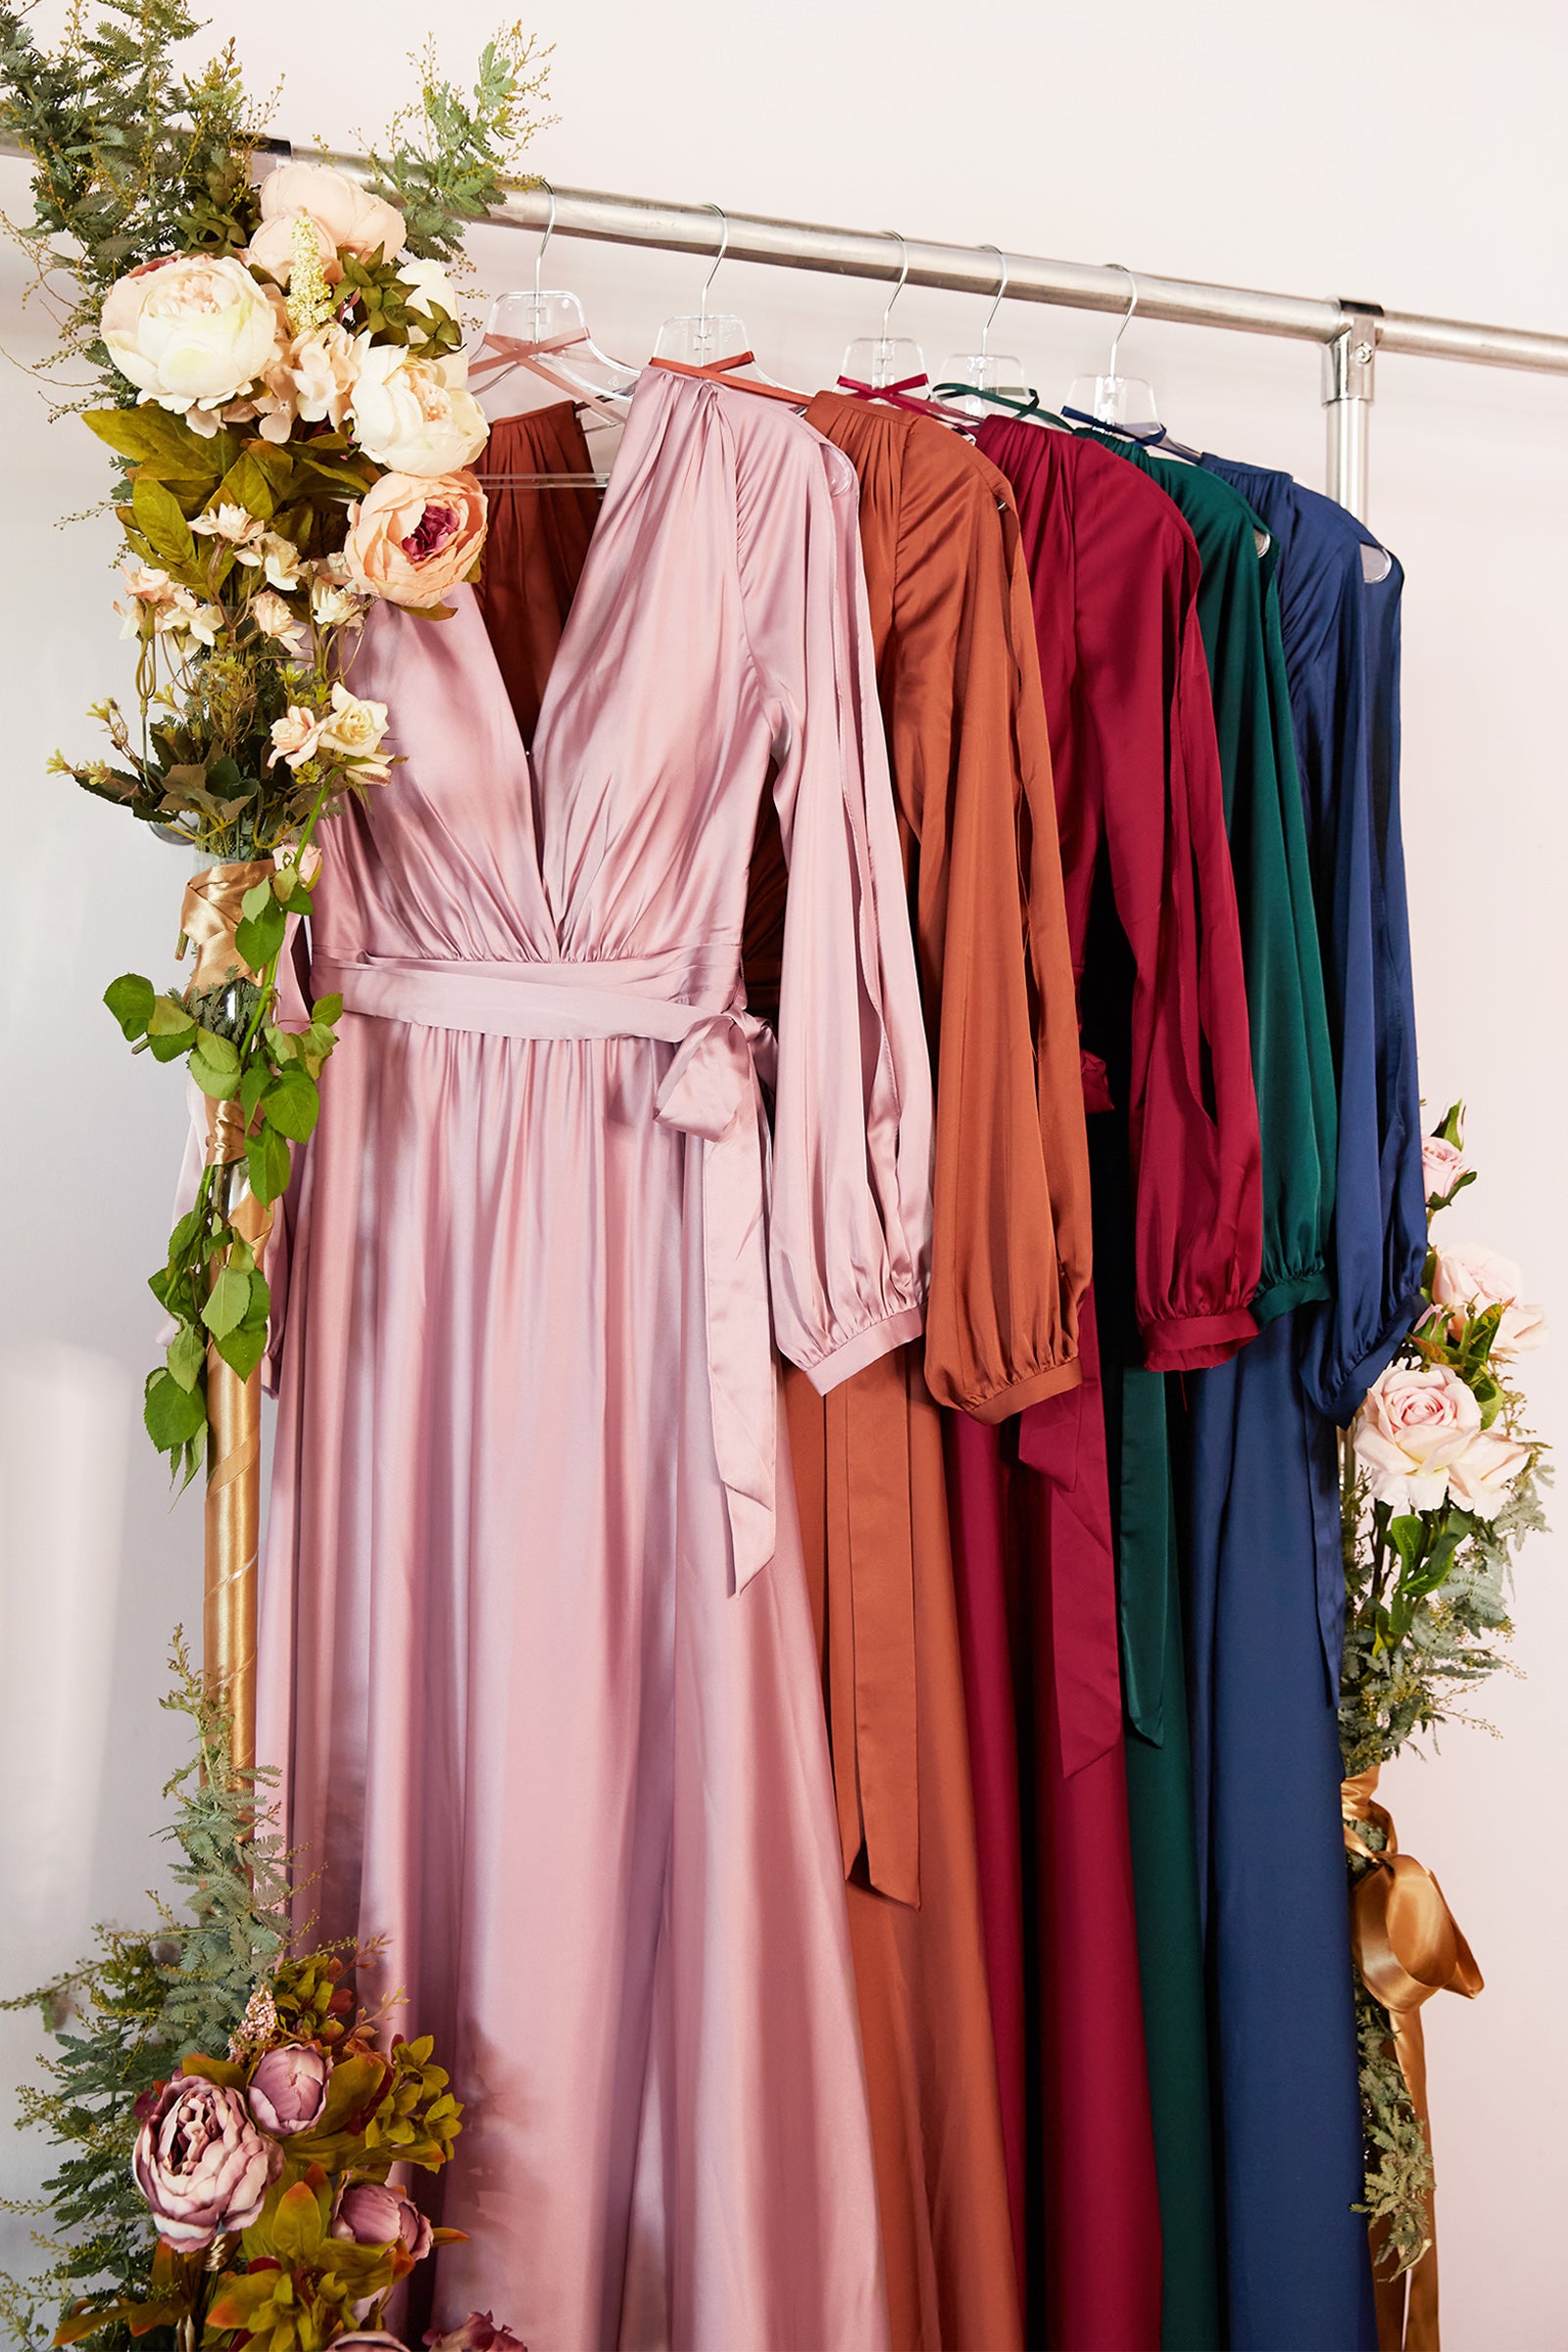 How To Hang Long Dresses